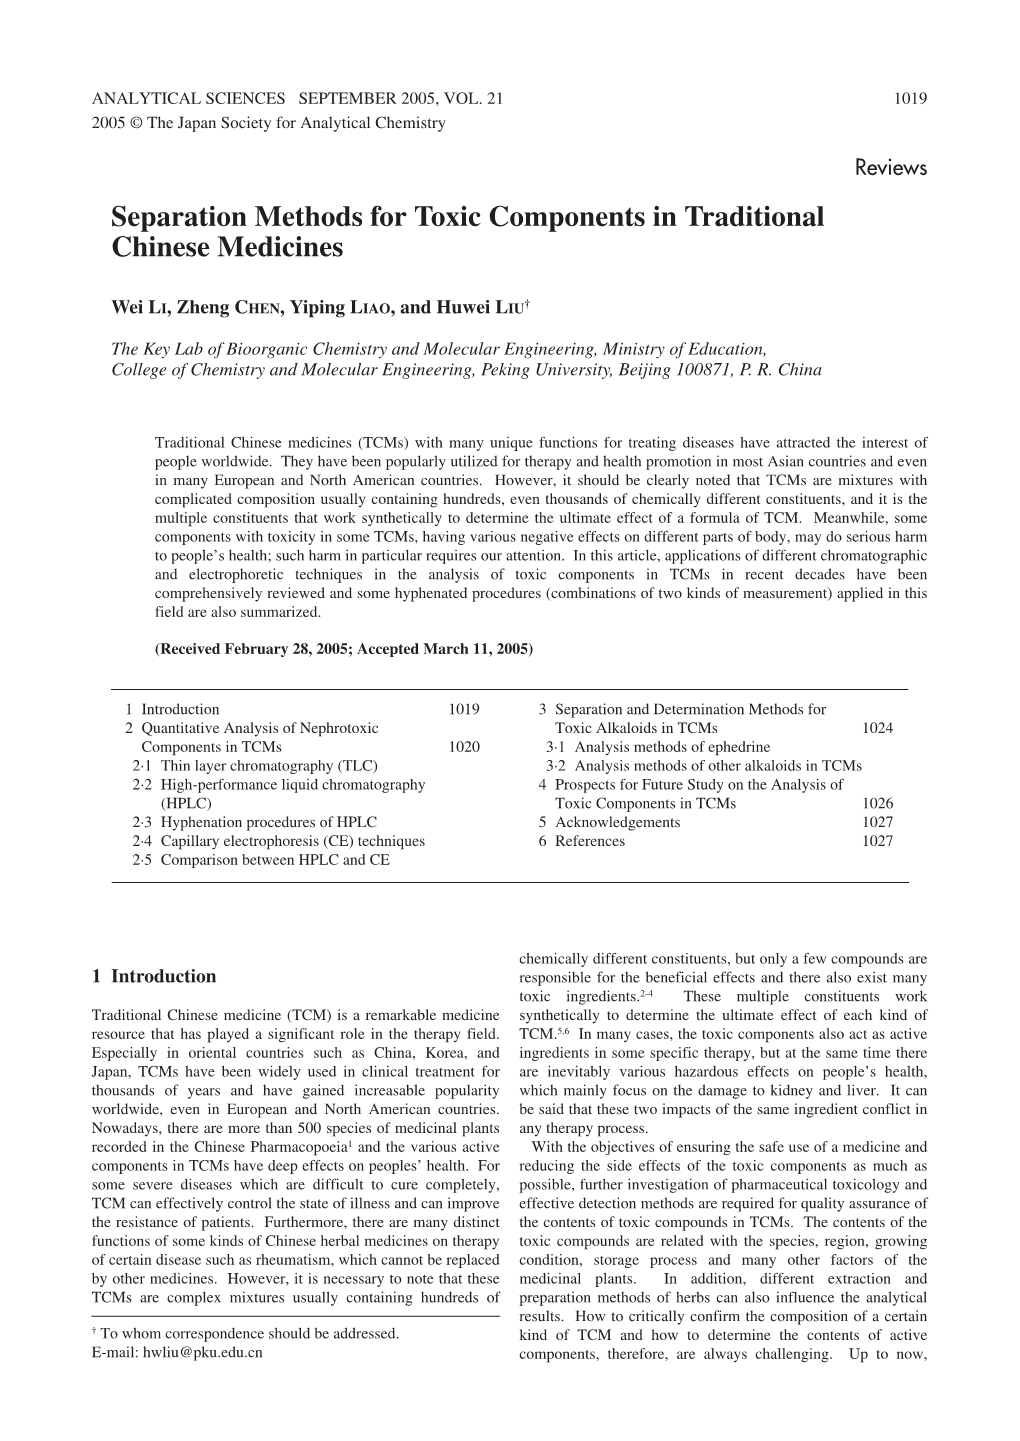 Separation Methods for Toxic Components in Traditional Chinese Medicines